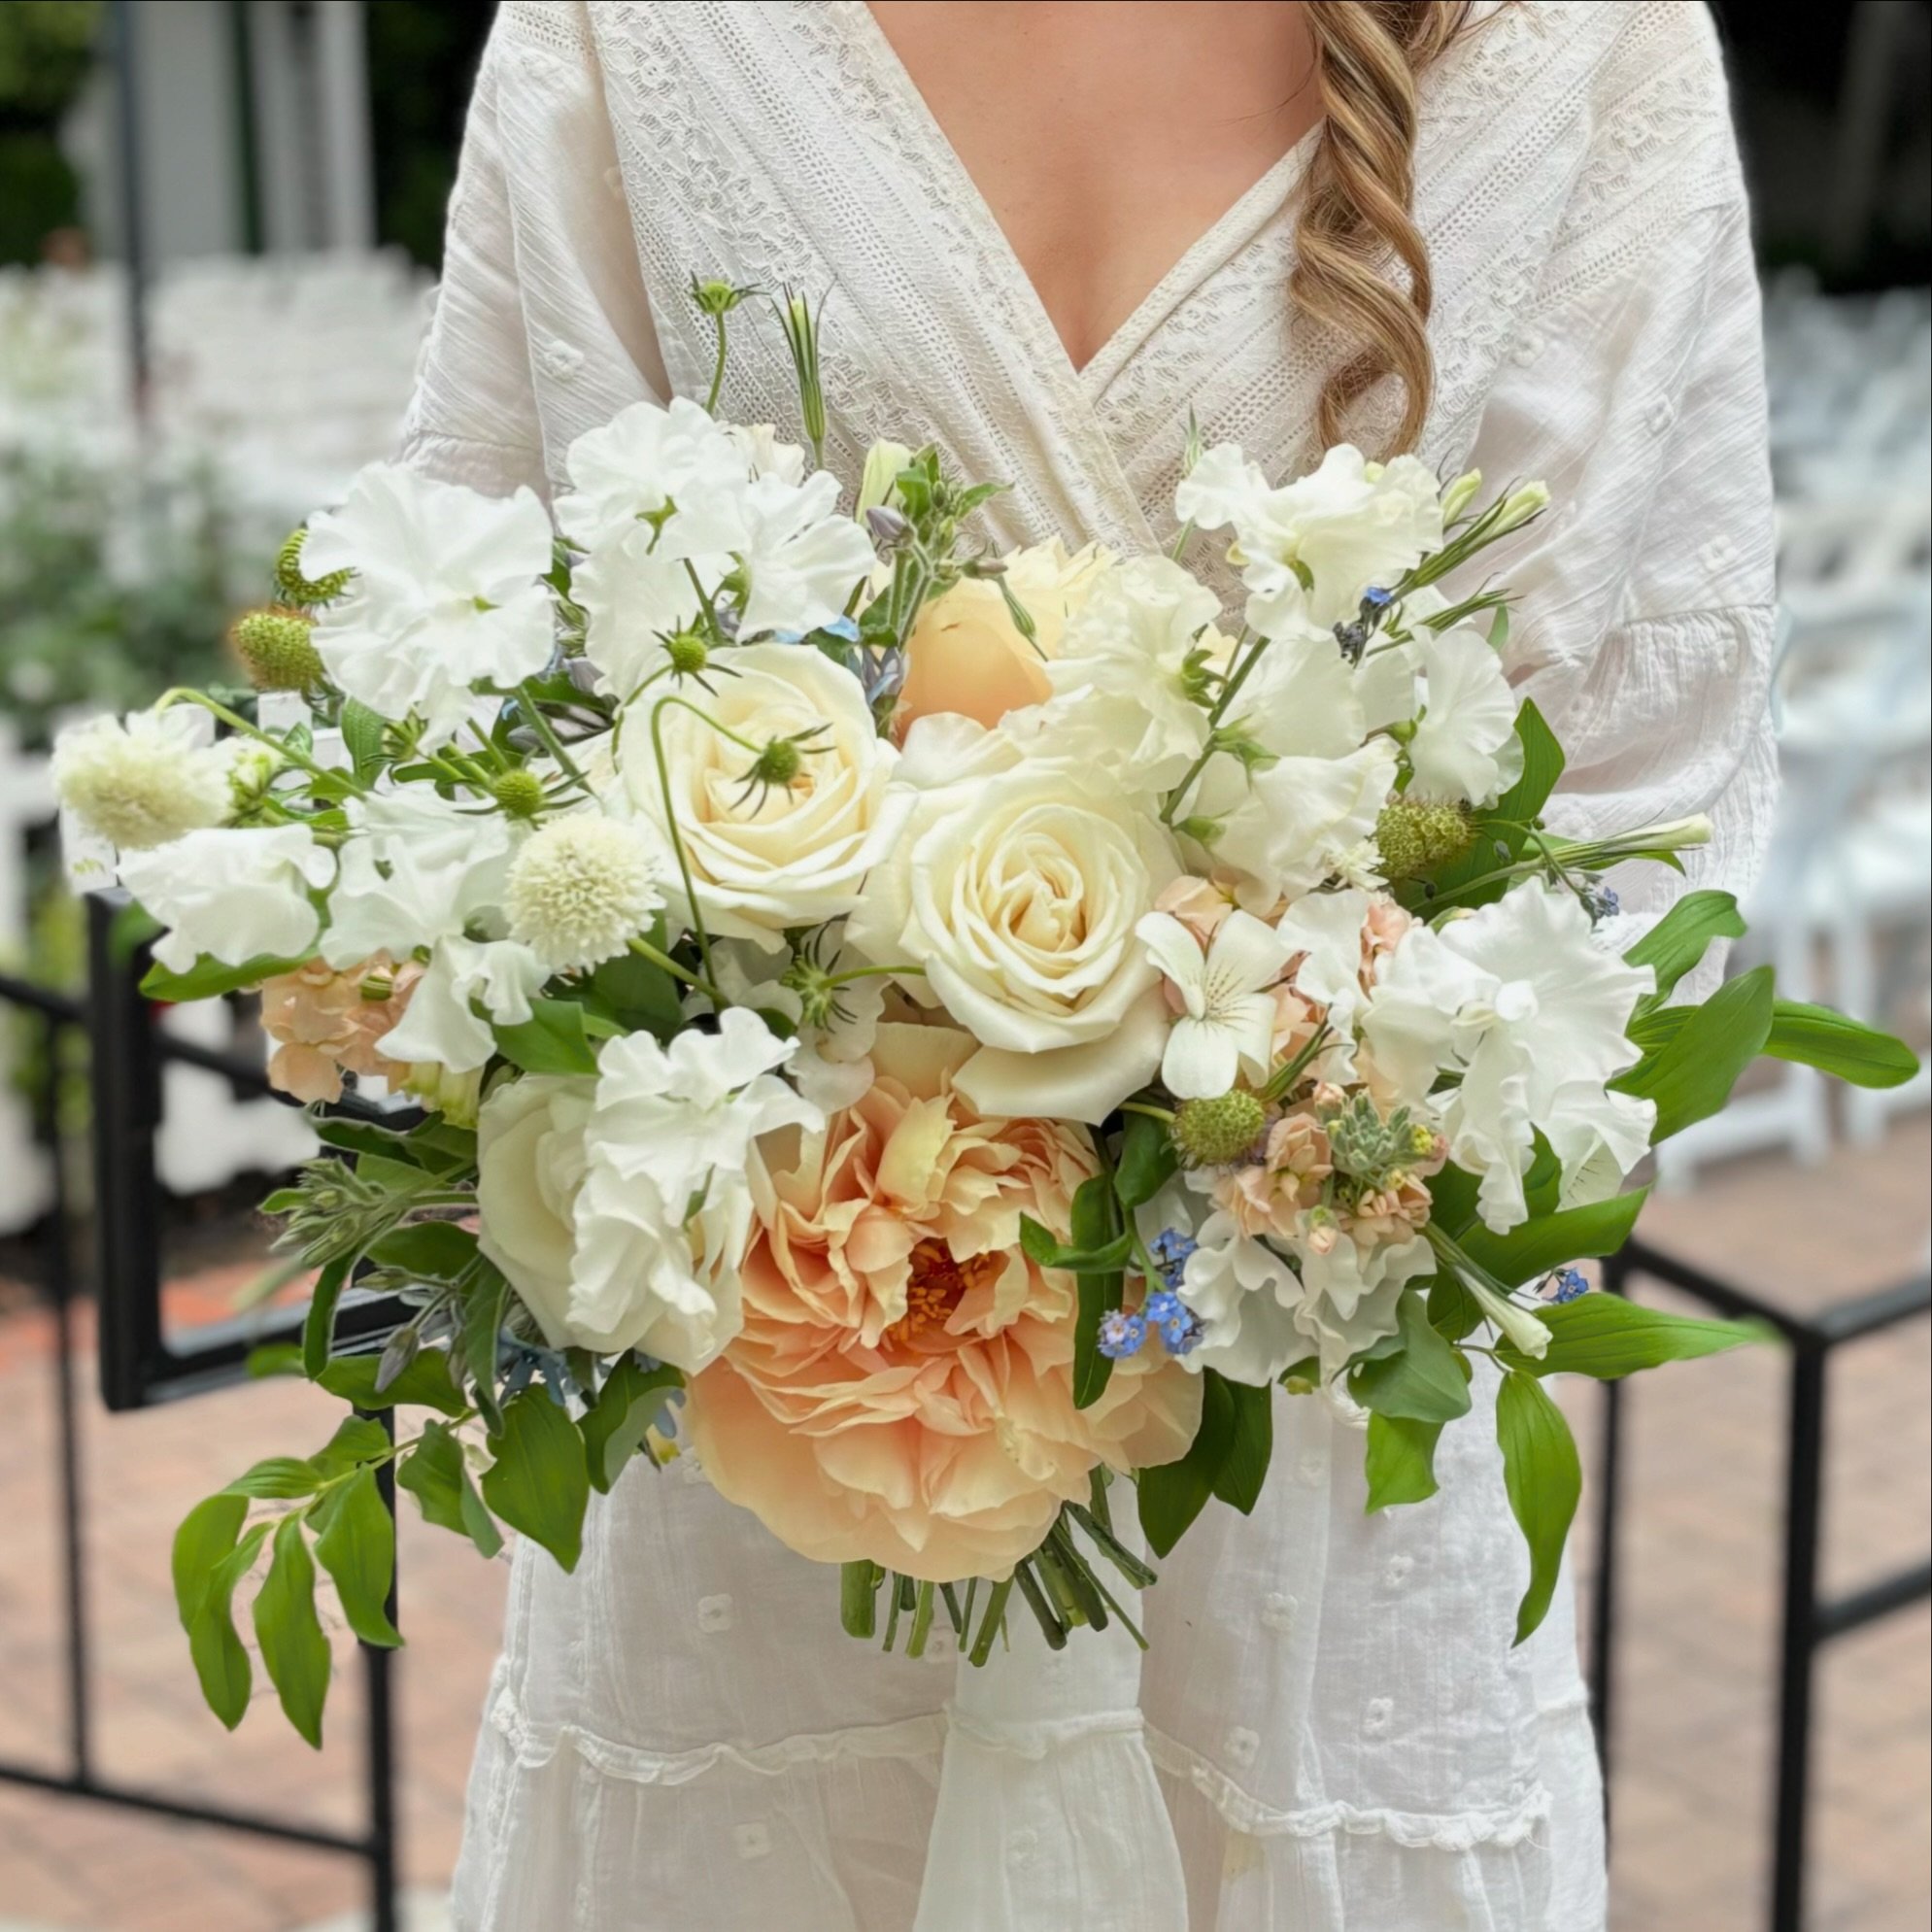 fluffy white sweet peas and pastelegance peonies with playa blanca roses, white scabiosa, blue forget-me-nots, peach stock, white corncockle + blue tweedia 💫
.
#wedding #bouquet #flowers #flowershop #weddingflowers #weddingflorist #florist